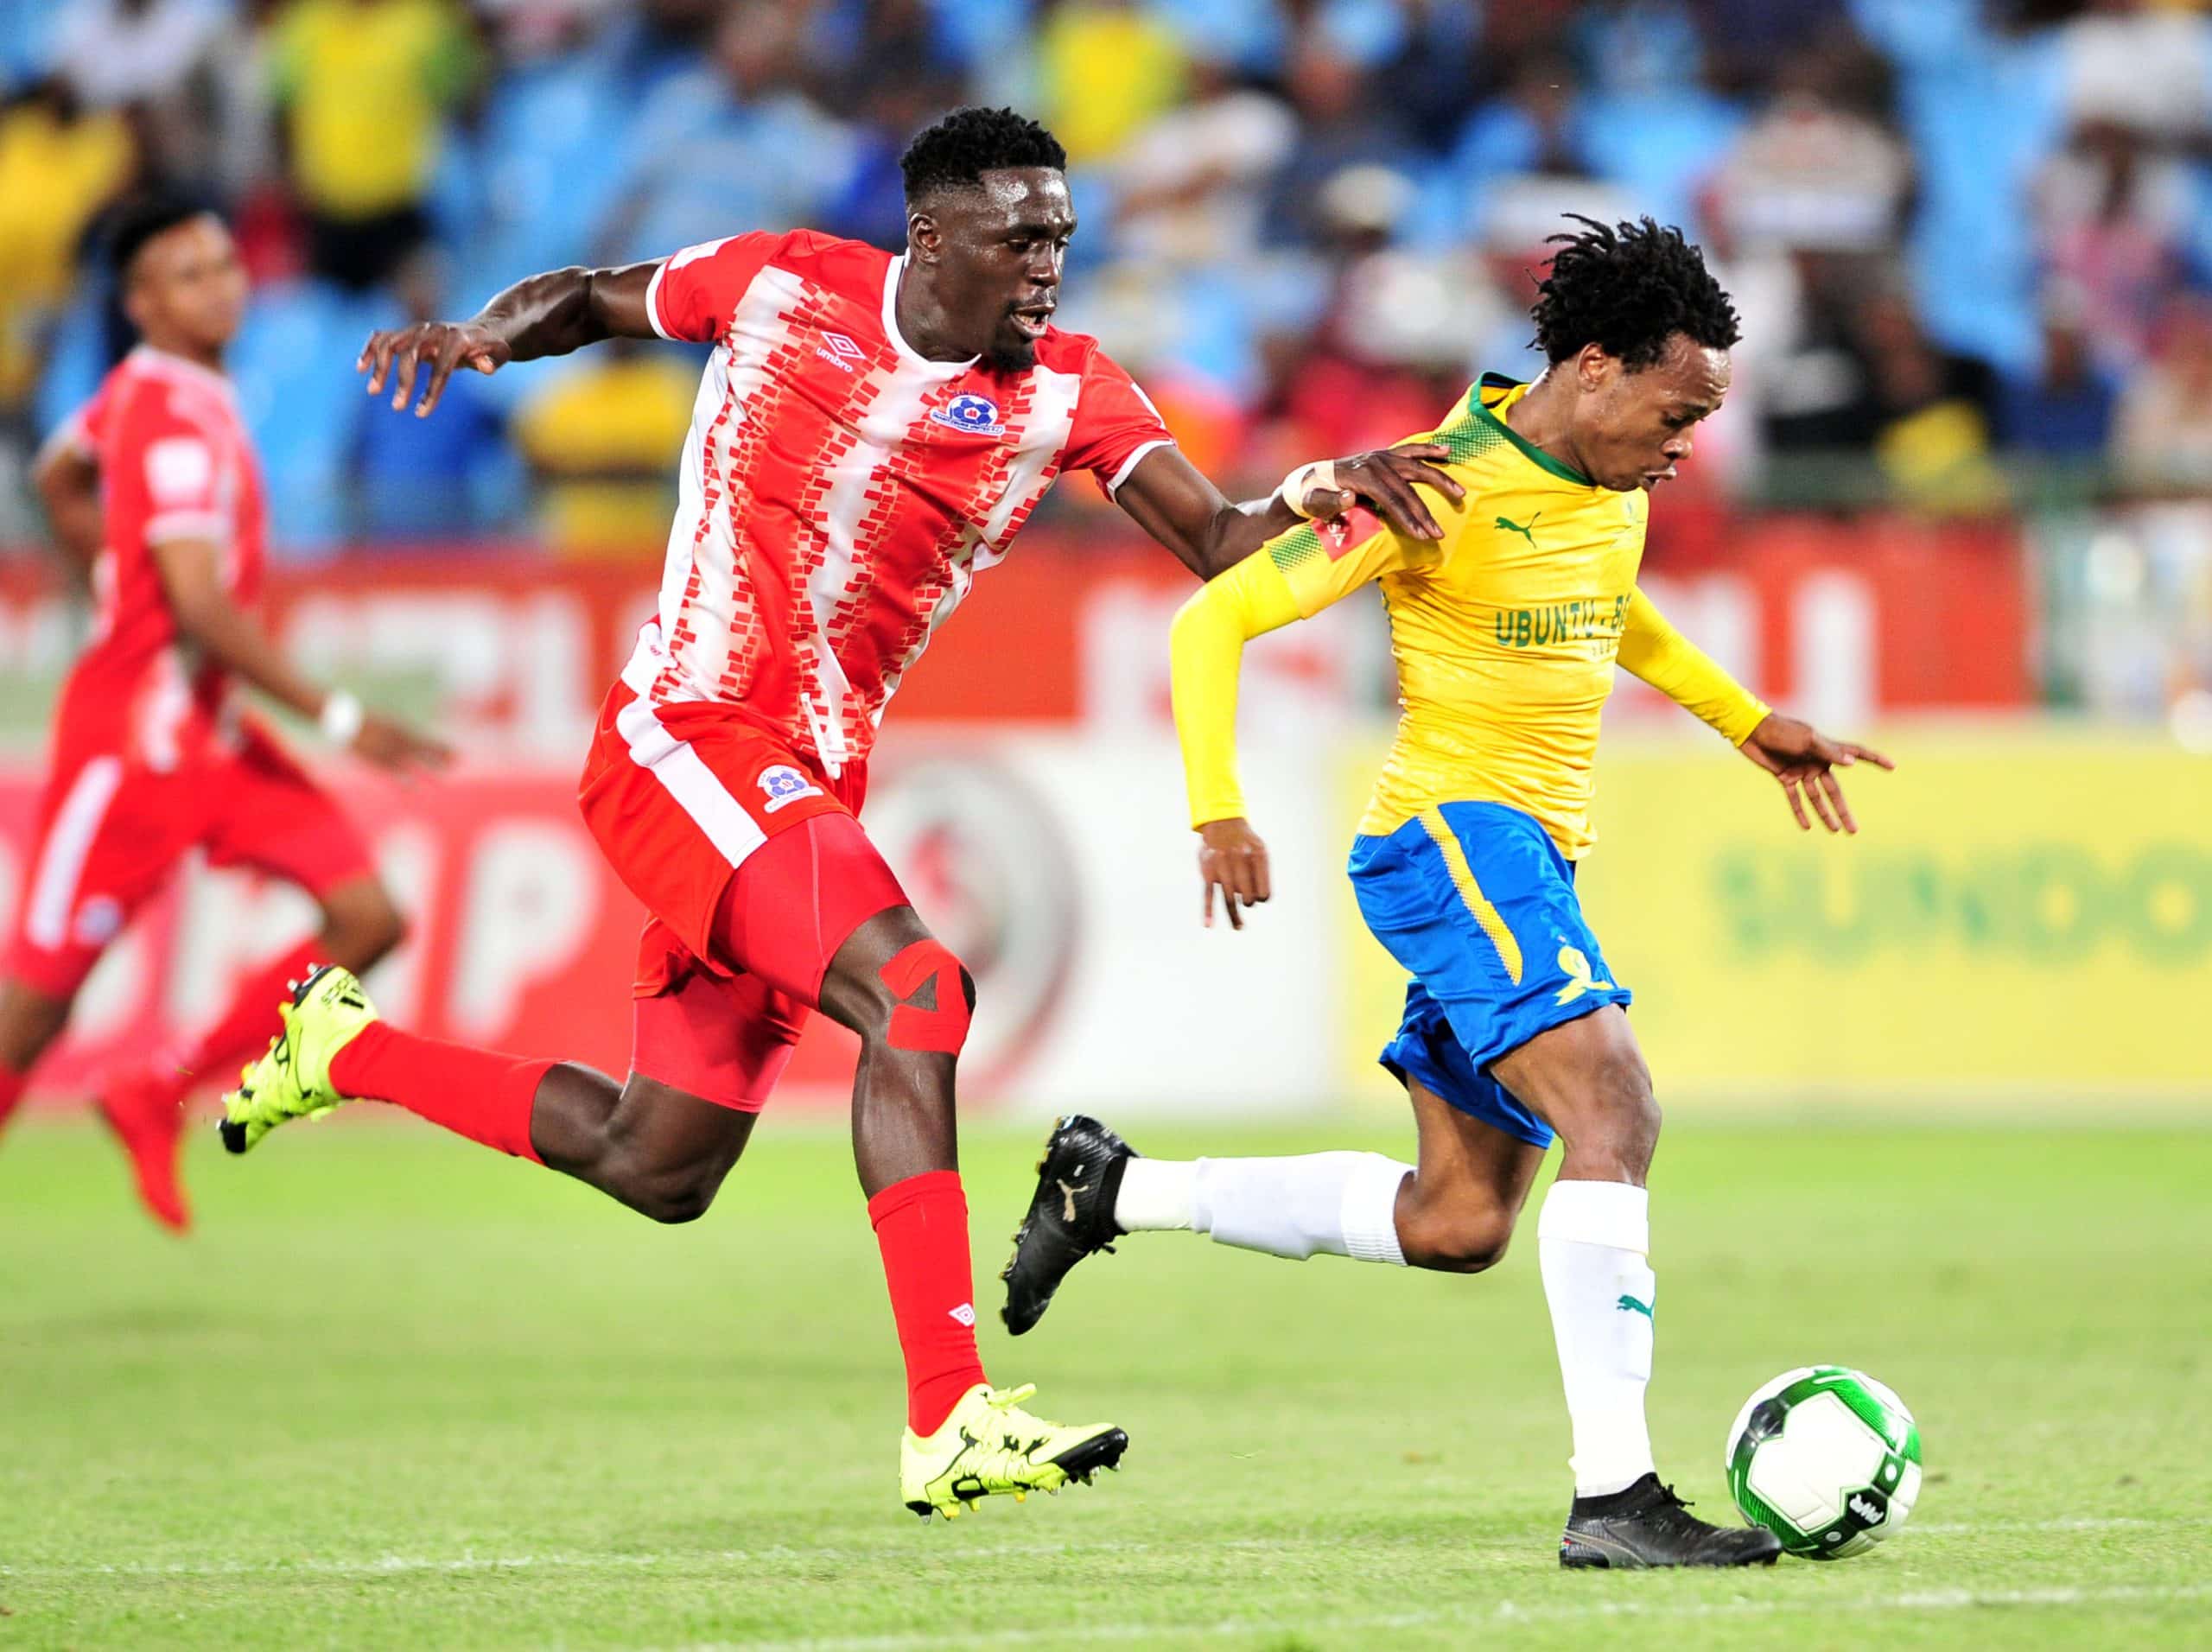 You are currently viewing Tau guides Sundowns past Maritzburg